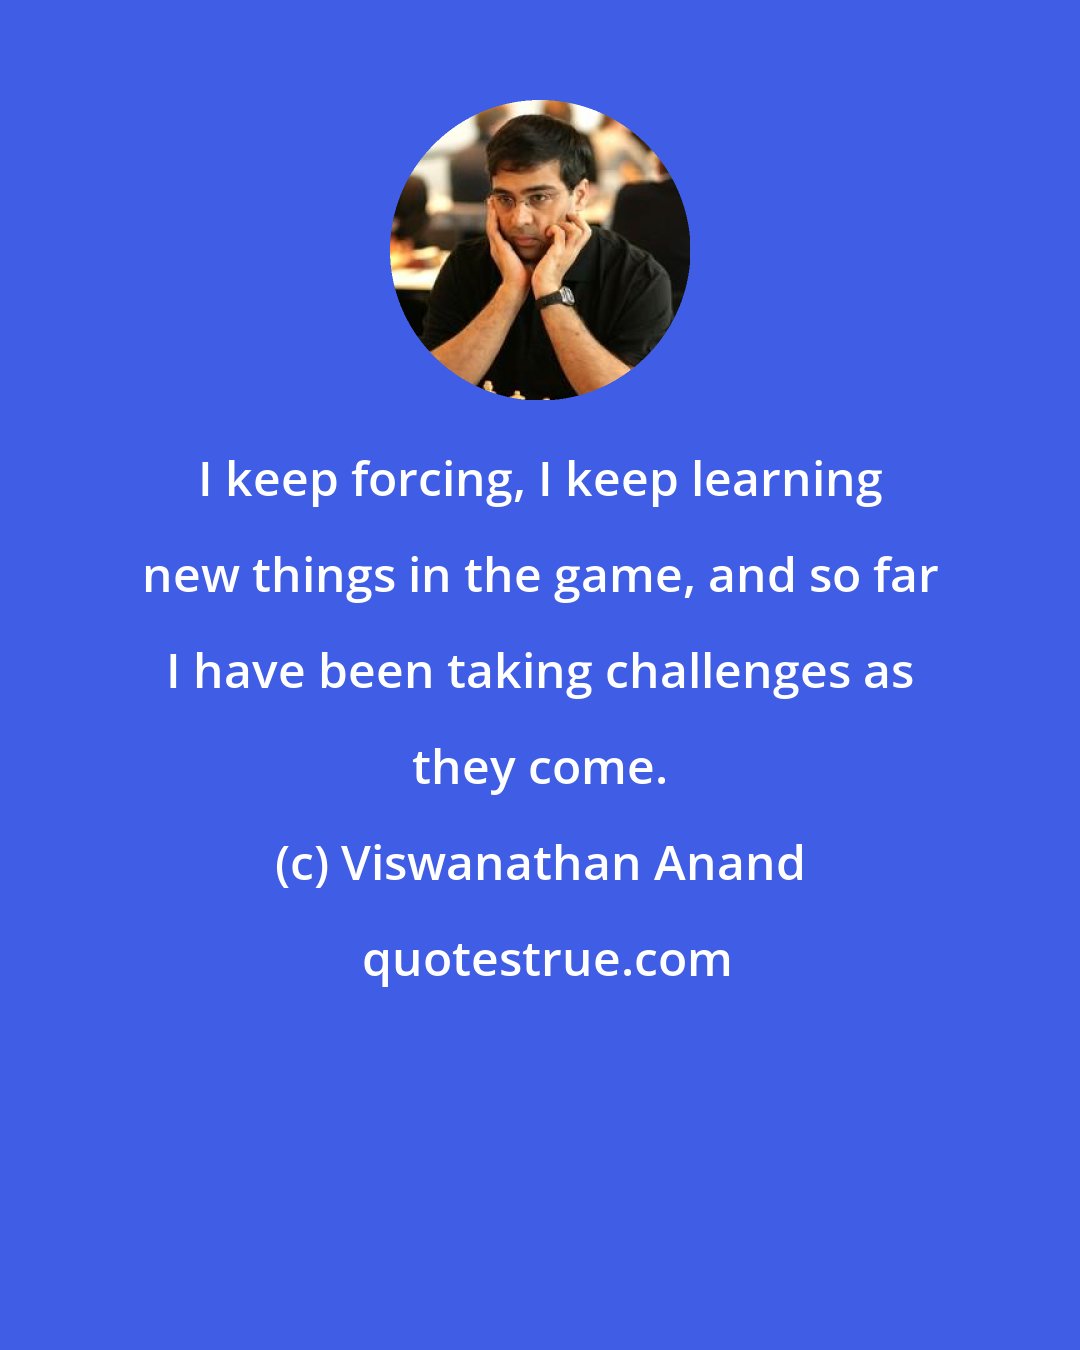 Viswanathan Anand: I keep forcing, I keep learning new things in the game, and so far I have been taking challenges as they come.